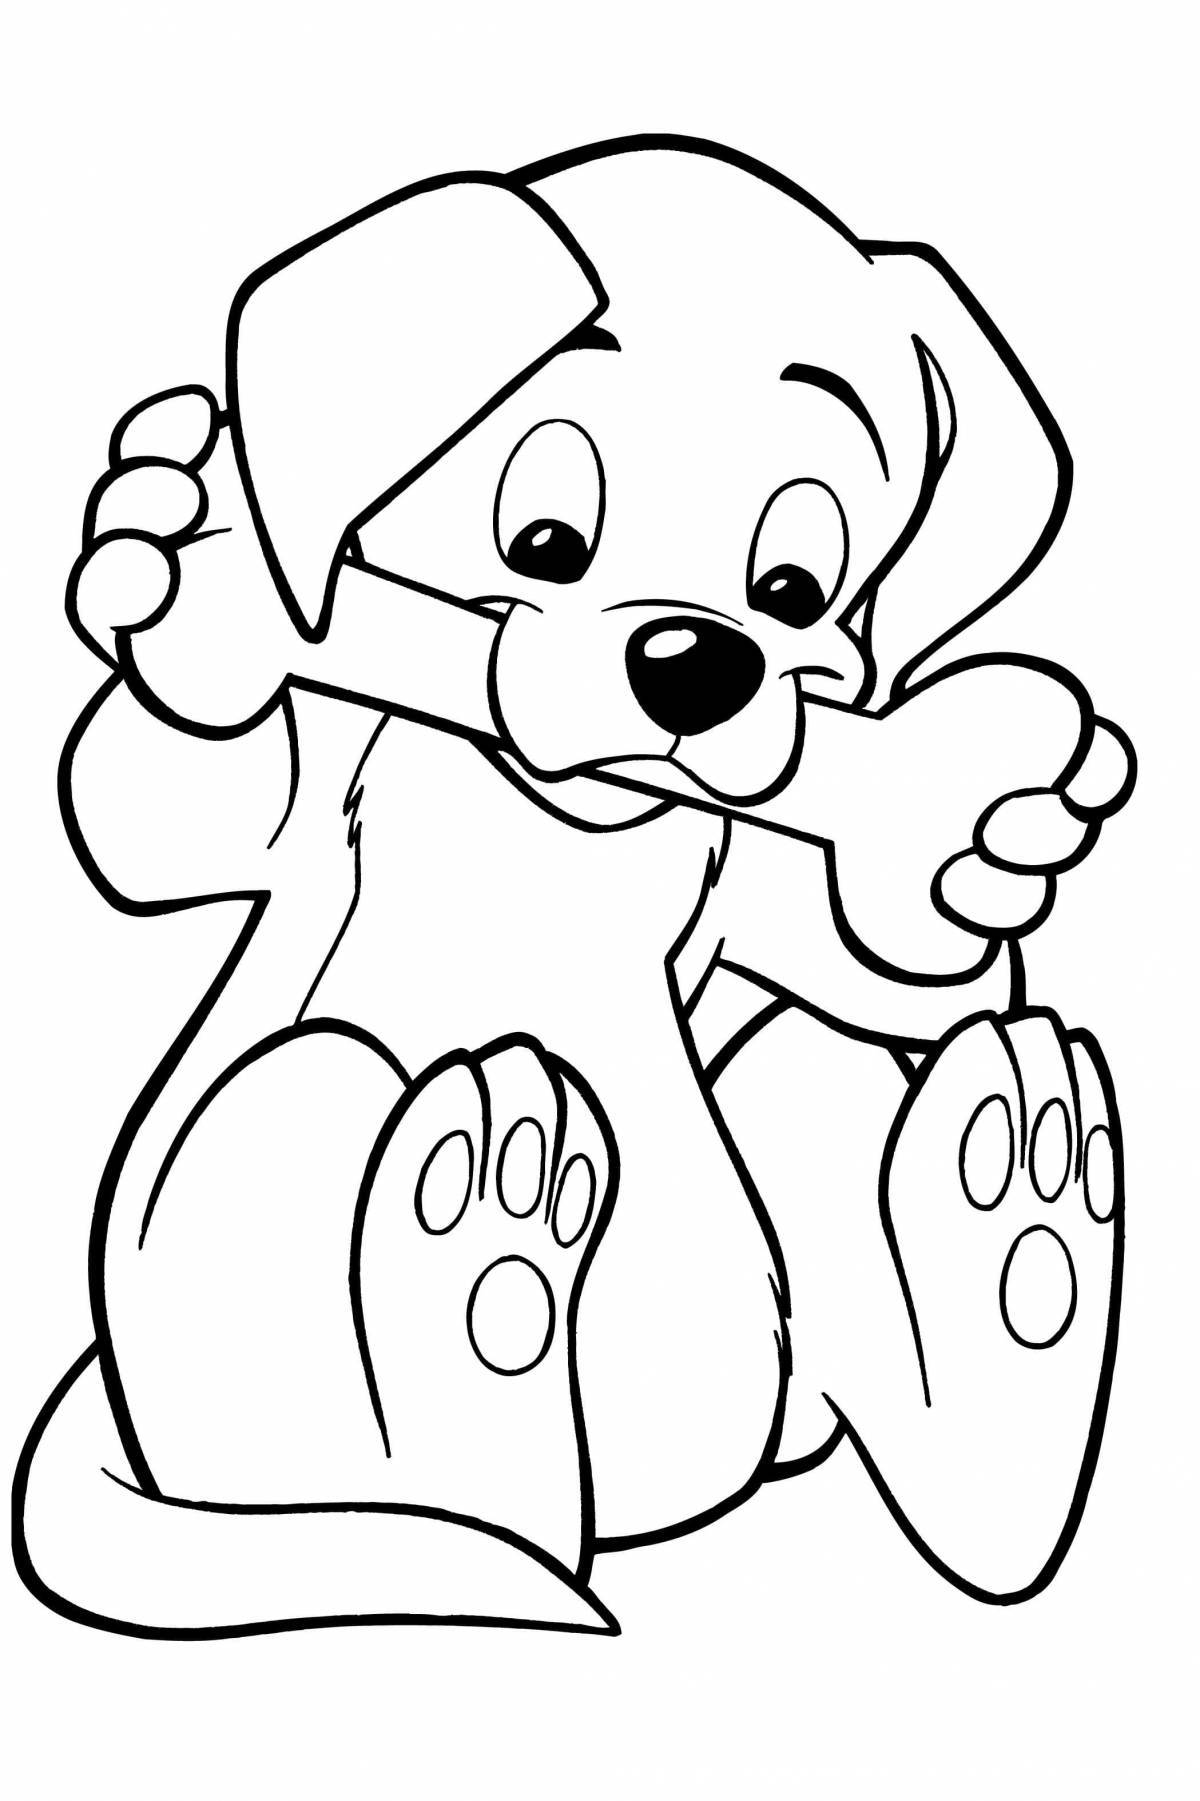 Animated dog coloring page